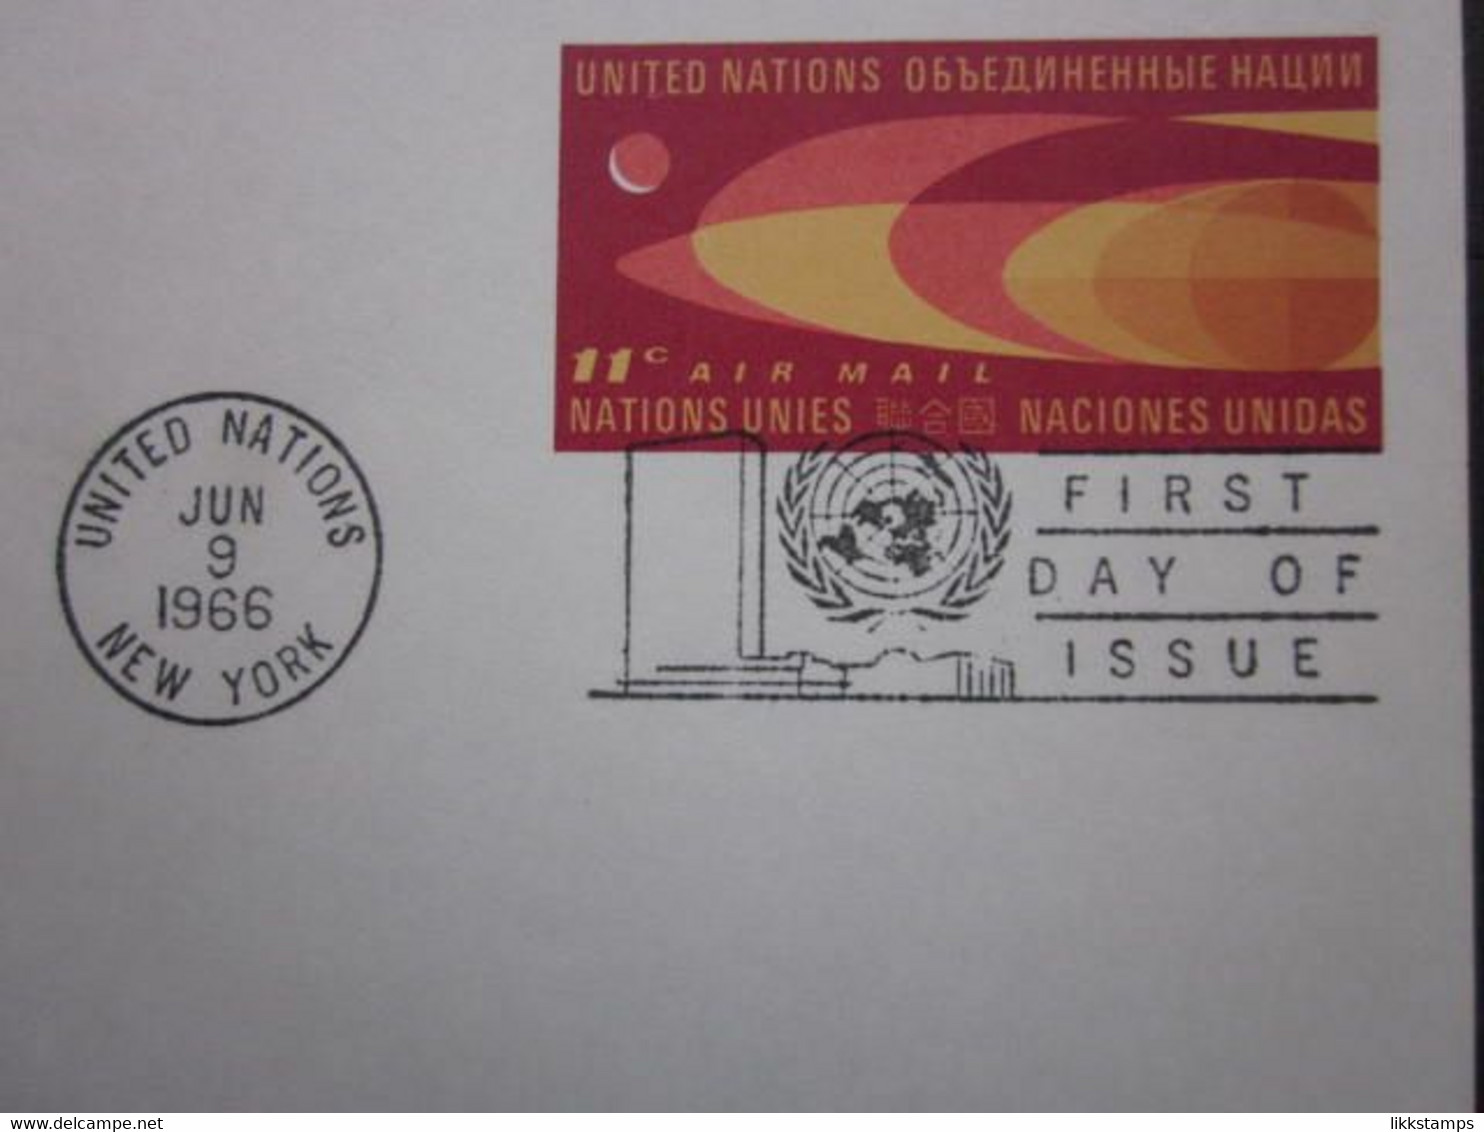 A GROUP OF SEVEN 1960's UNITED NATIONS POSTAL CARDS WITH FIRST DAY OF ISSUE POSTMARKS. ( 02227 )